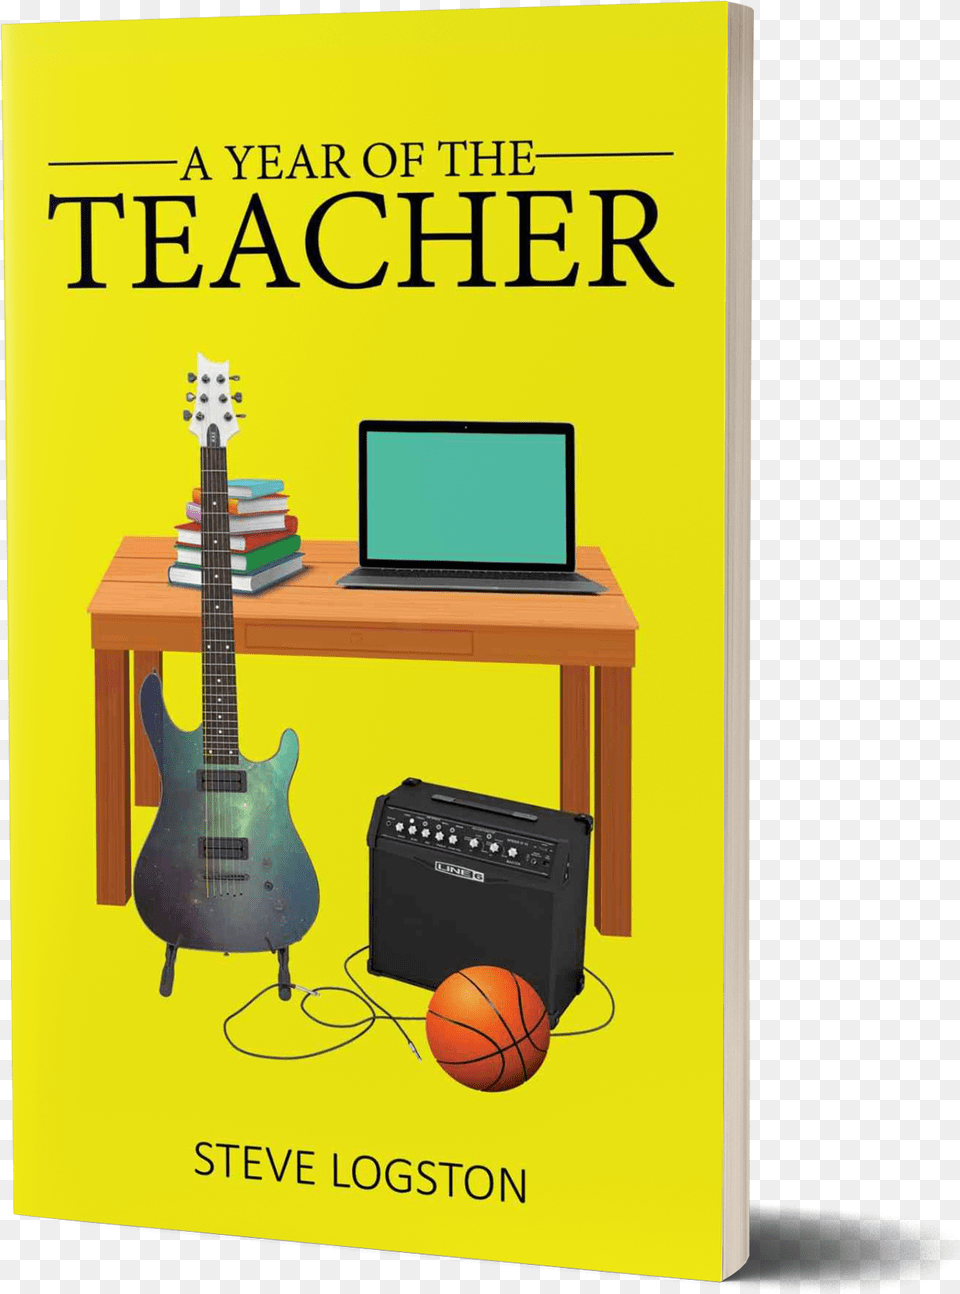 Steve Logston Hosted His Book Signing Event Basketball, Ball, Sport, Basketball (ball), Musical Instrument Free Transparent Png